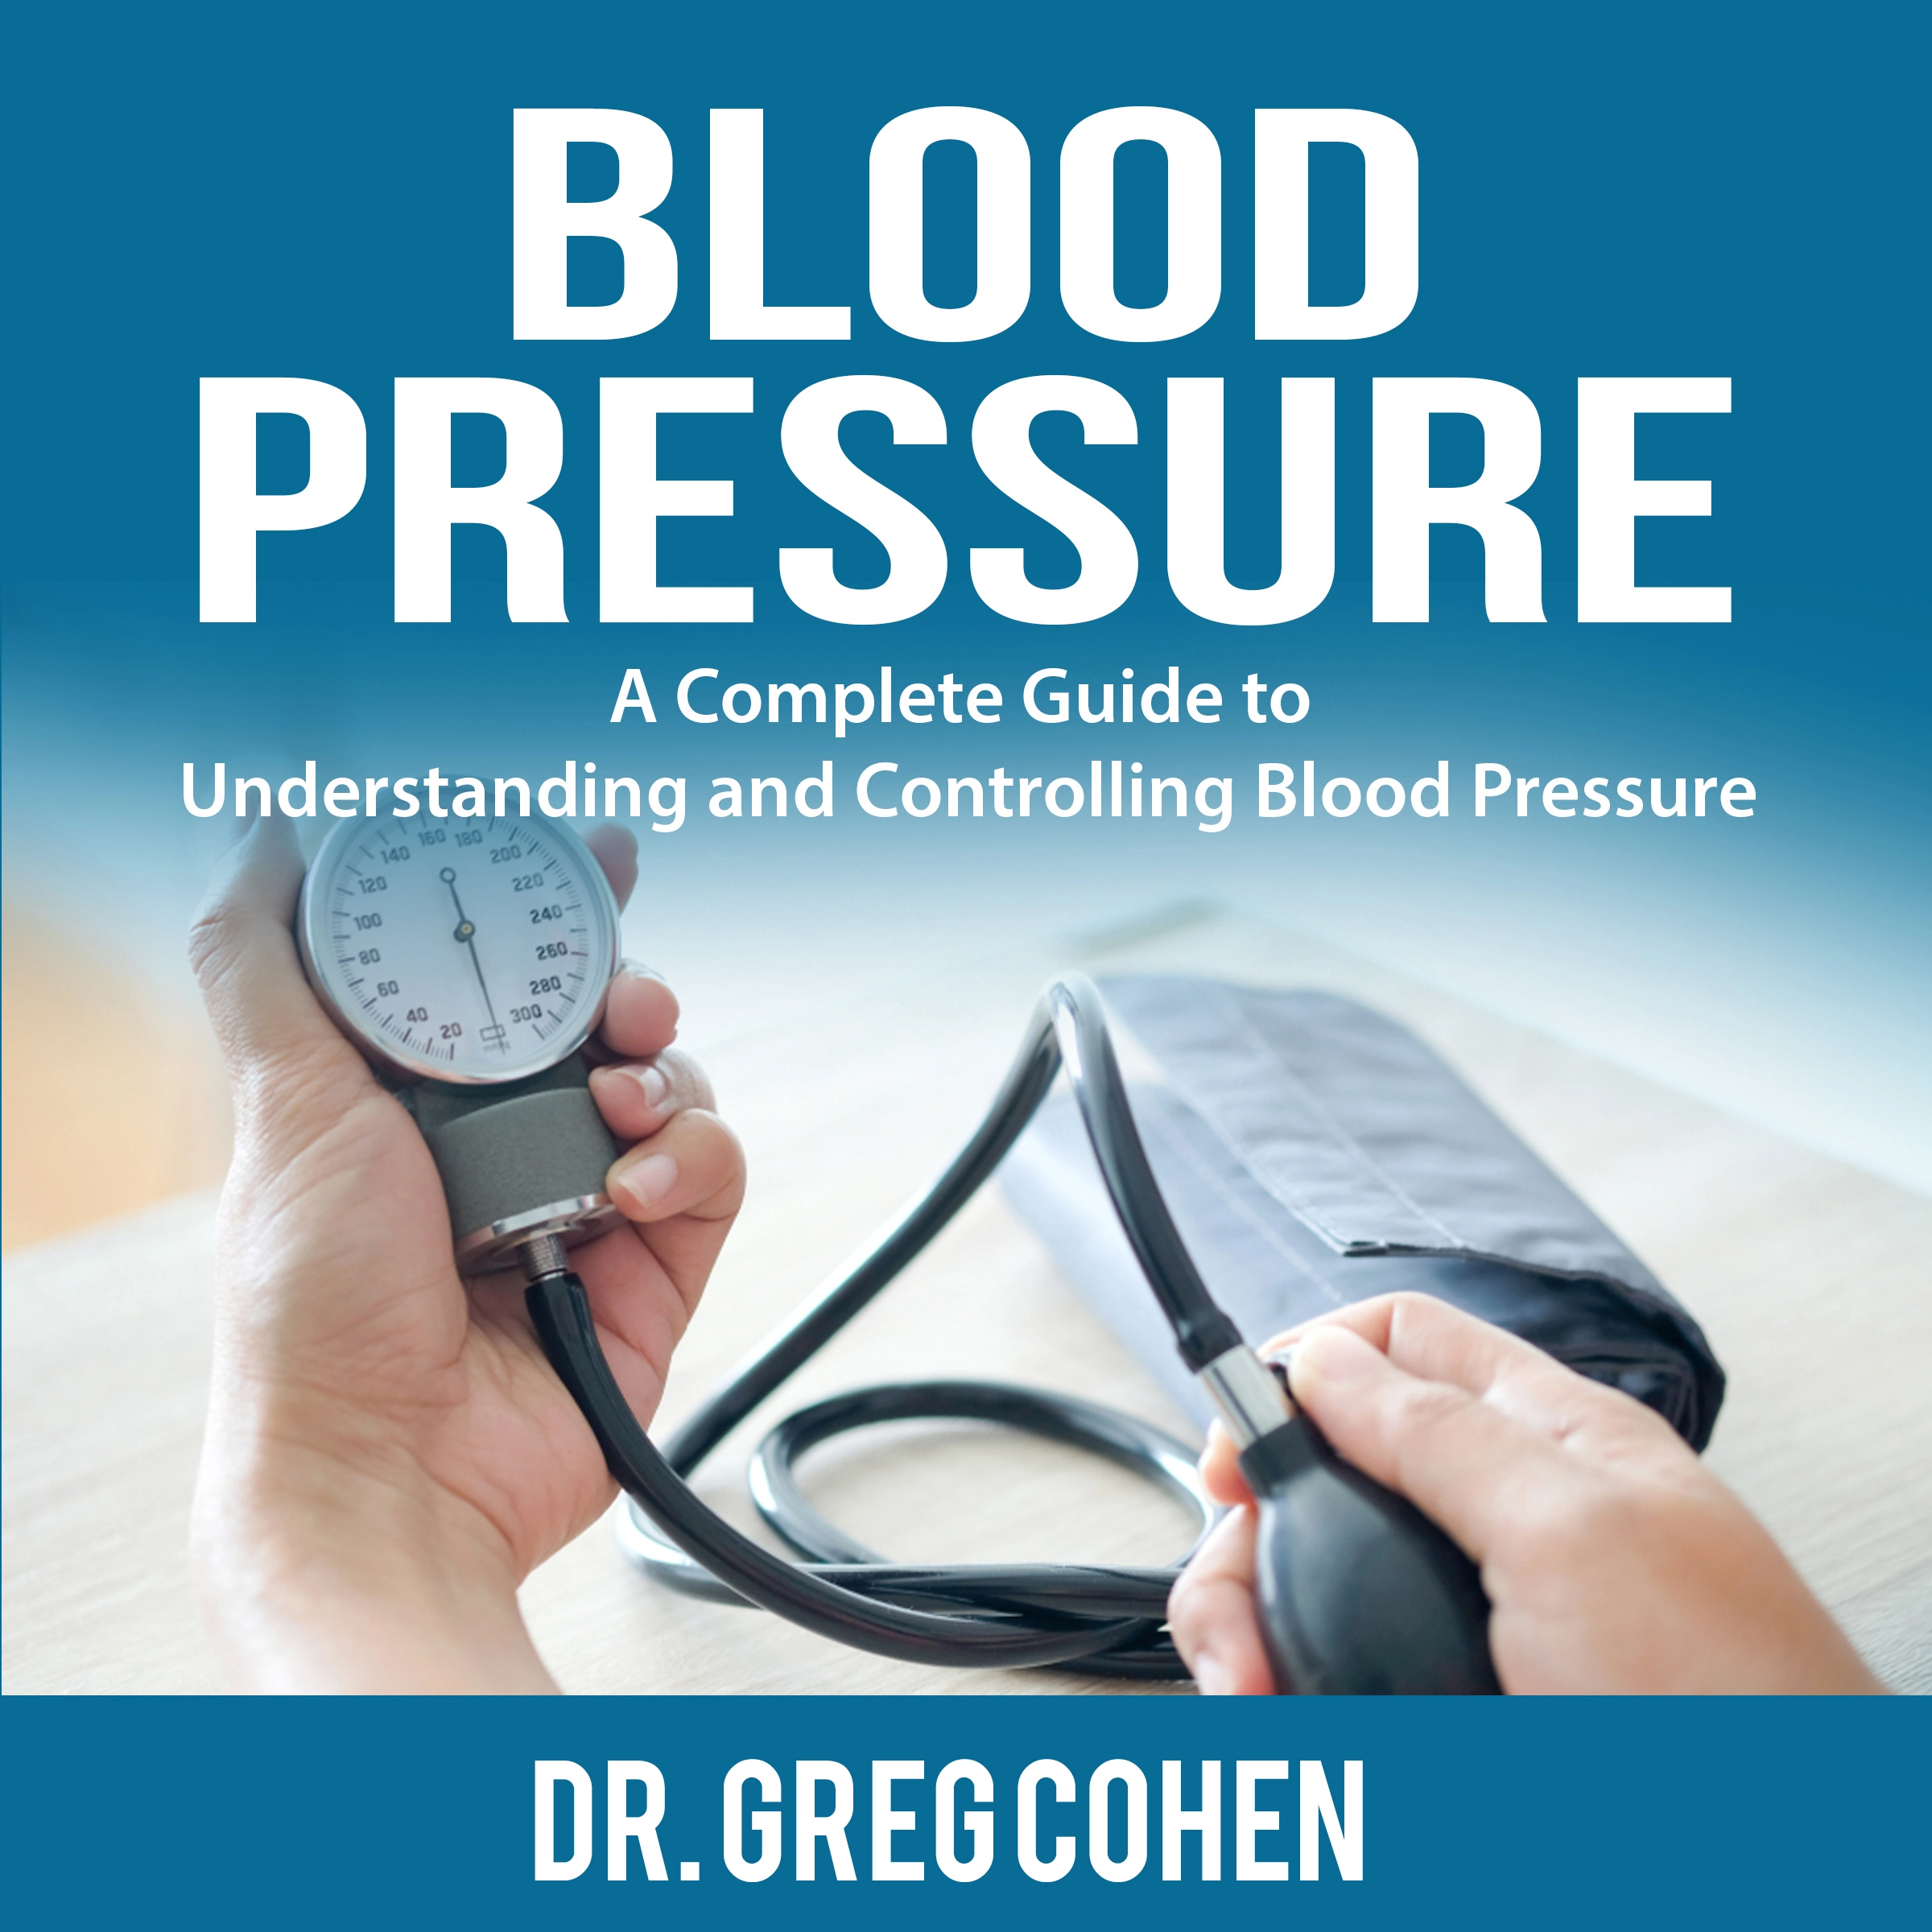 Blood Pressure: A Complete Guide to Understanding and Controlling Blood Pressure Audiobook by Dr. Greg Cohen